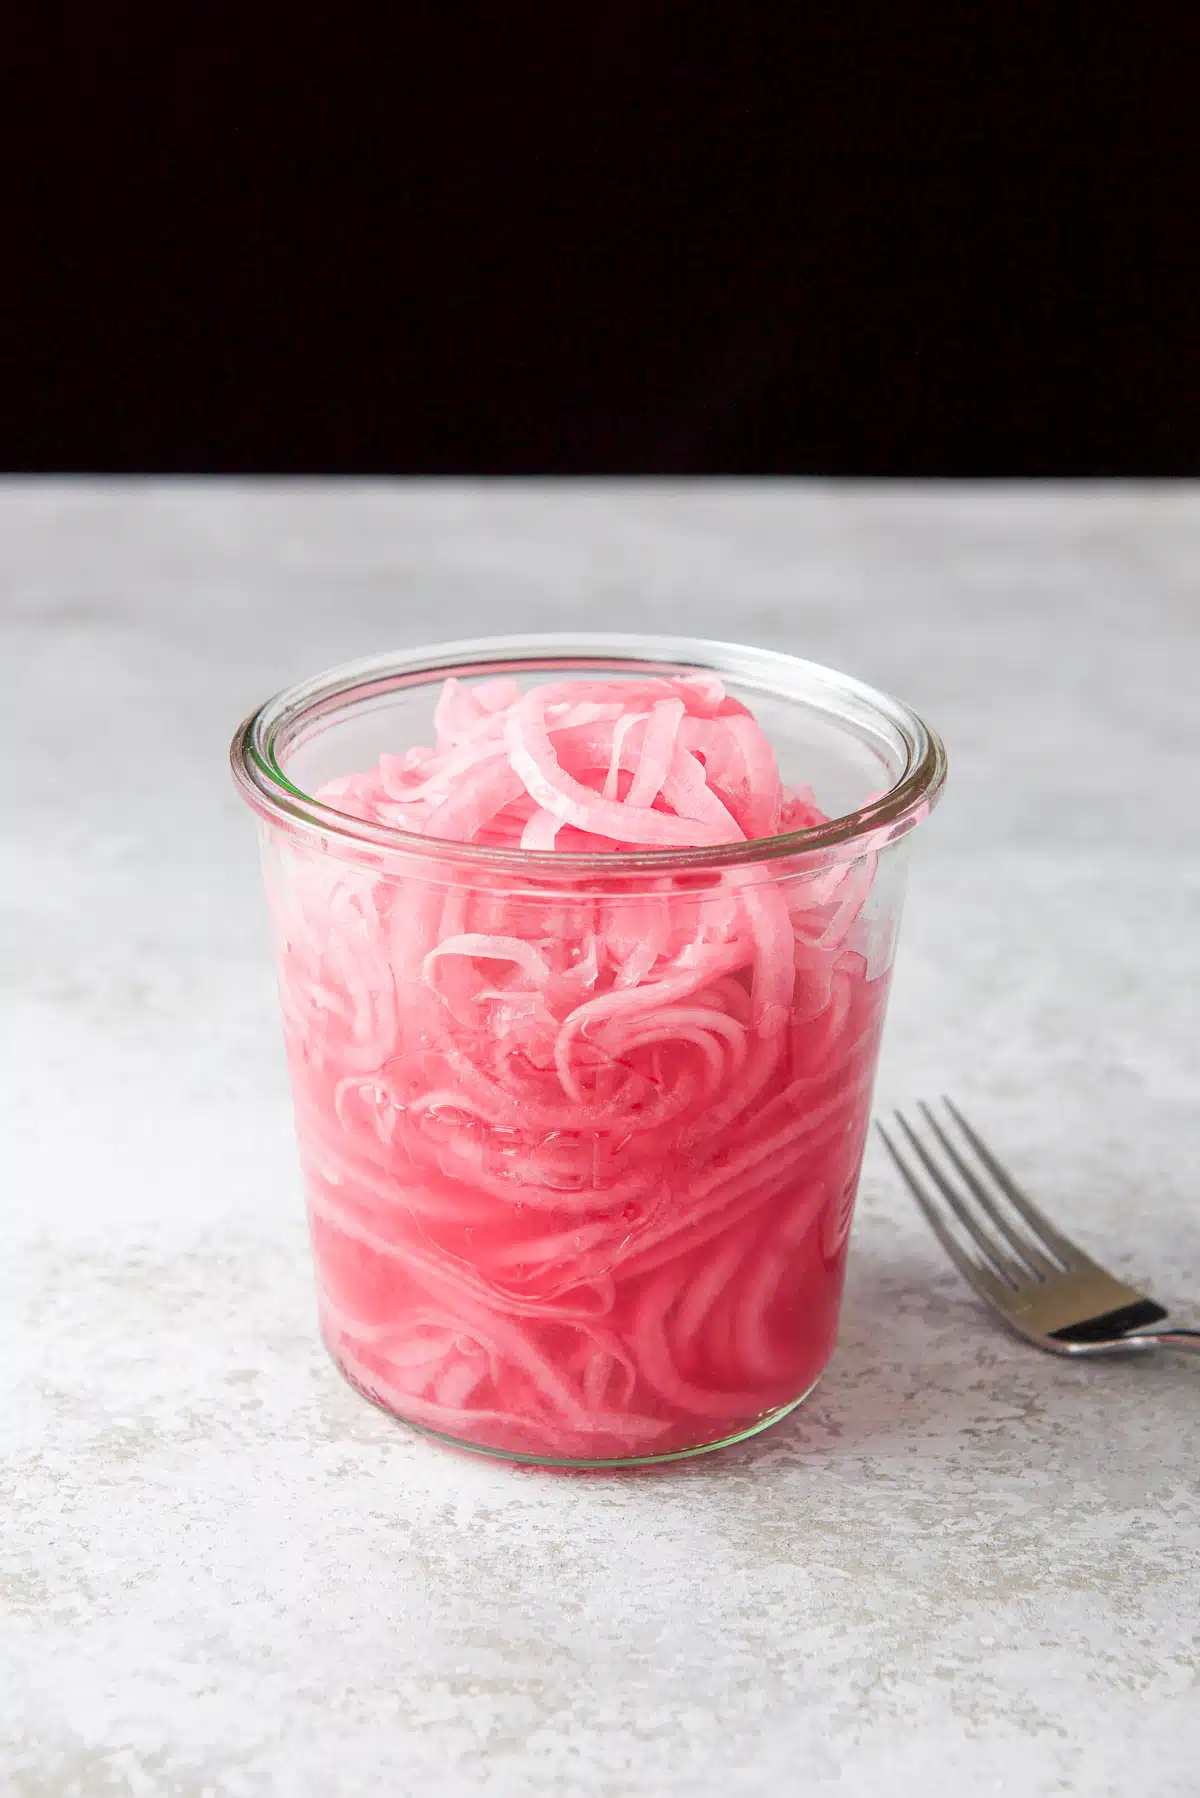 A fork on the table with an open jar of pickled red onions